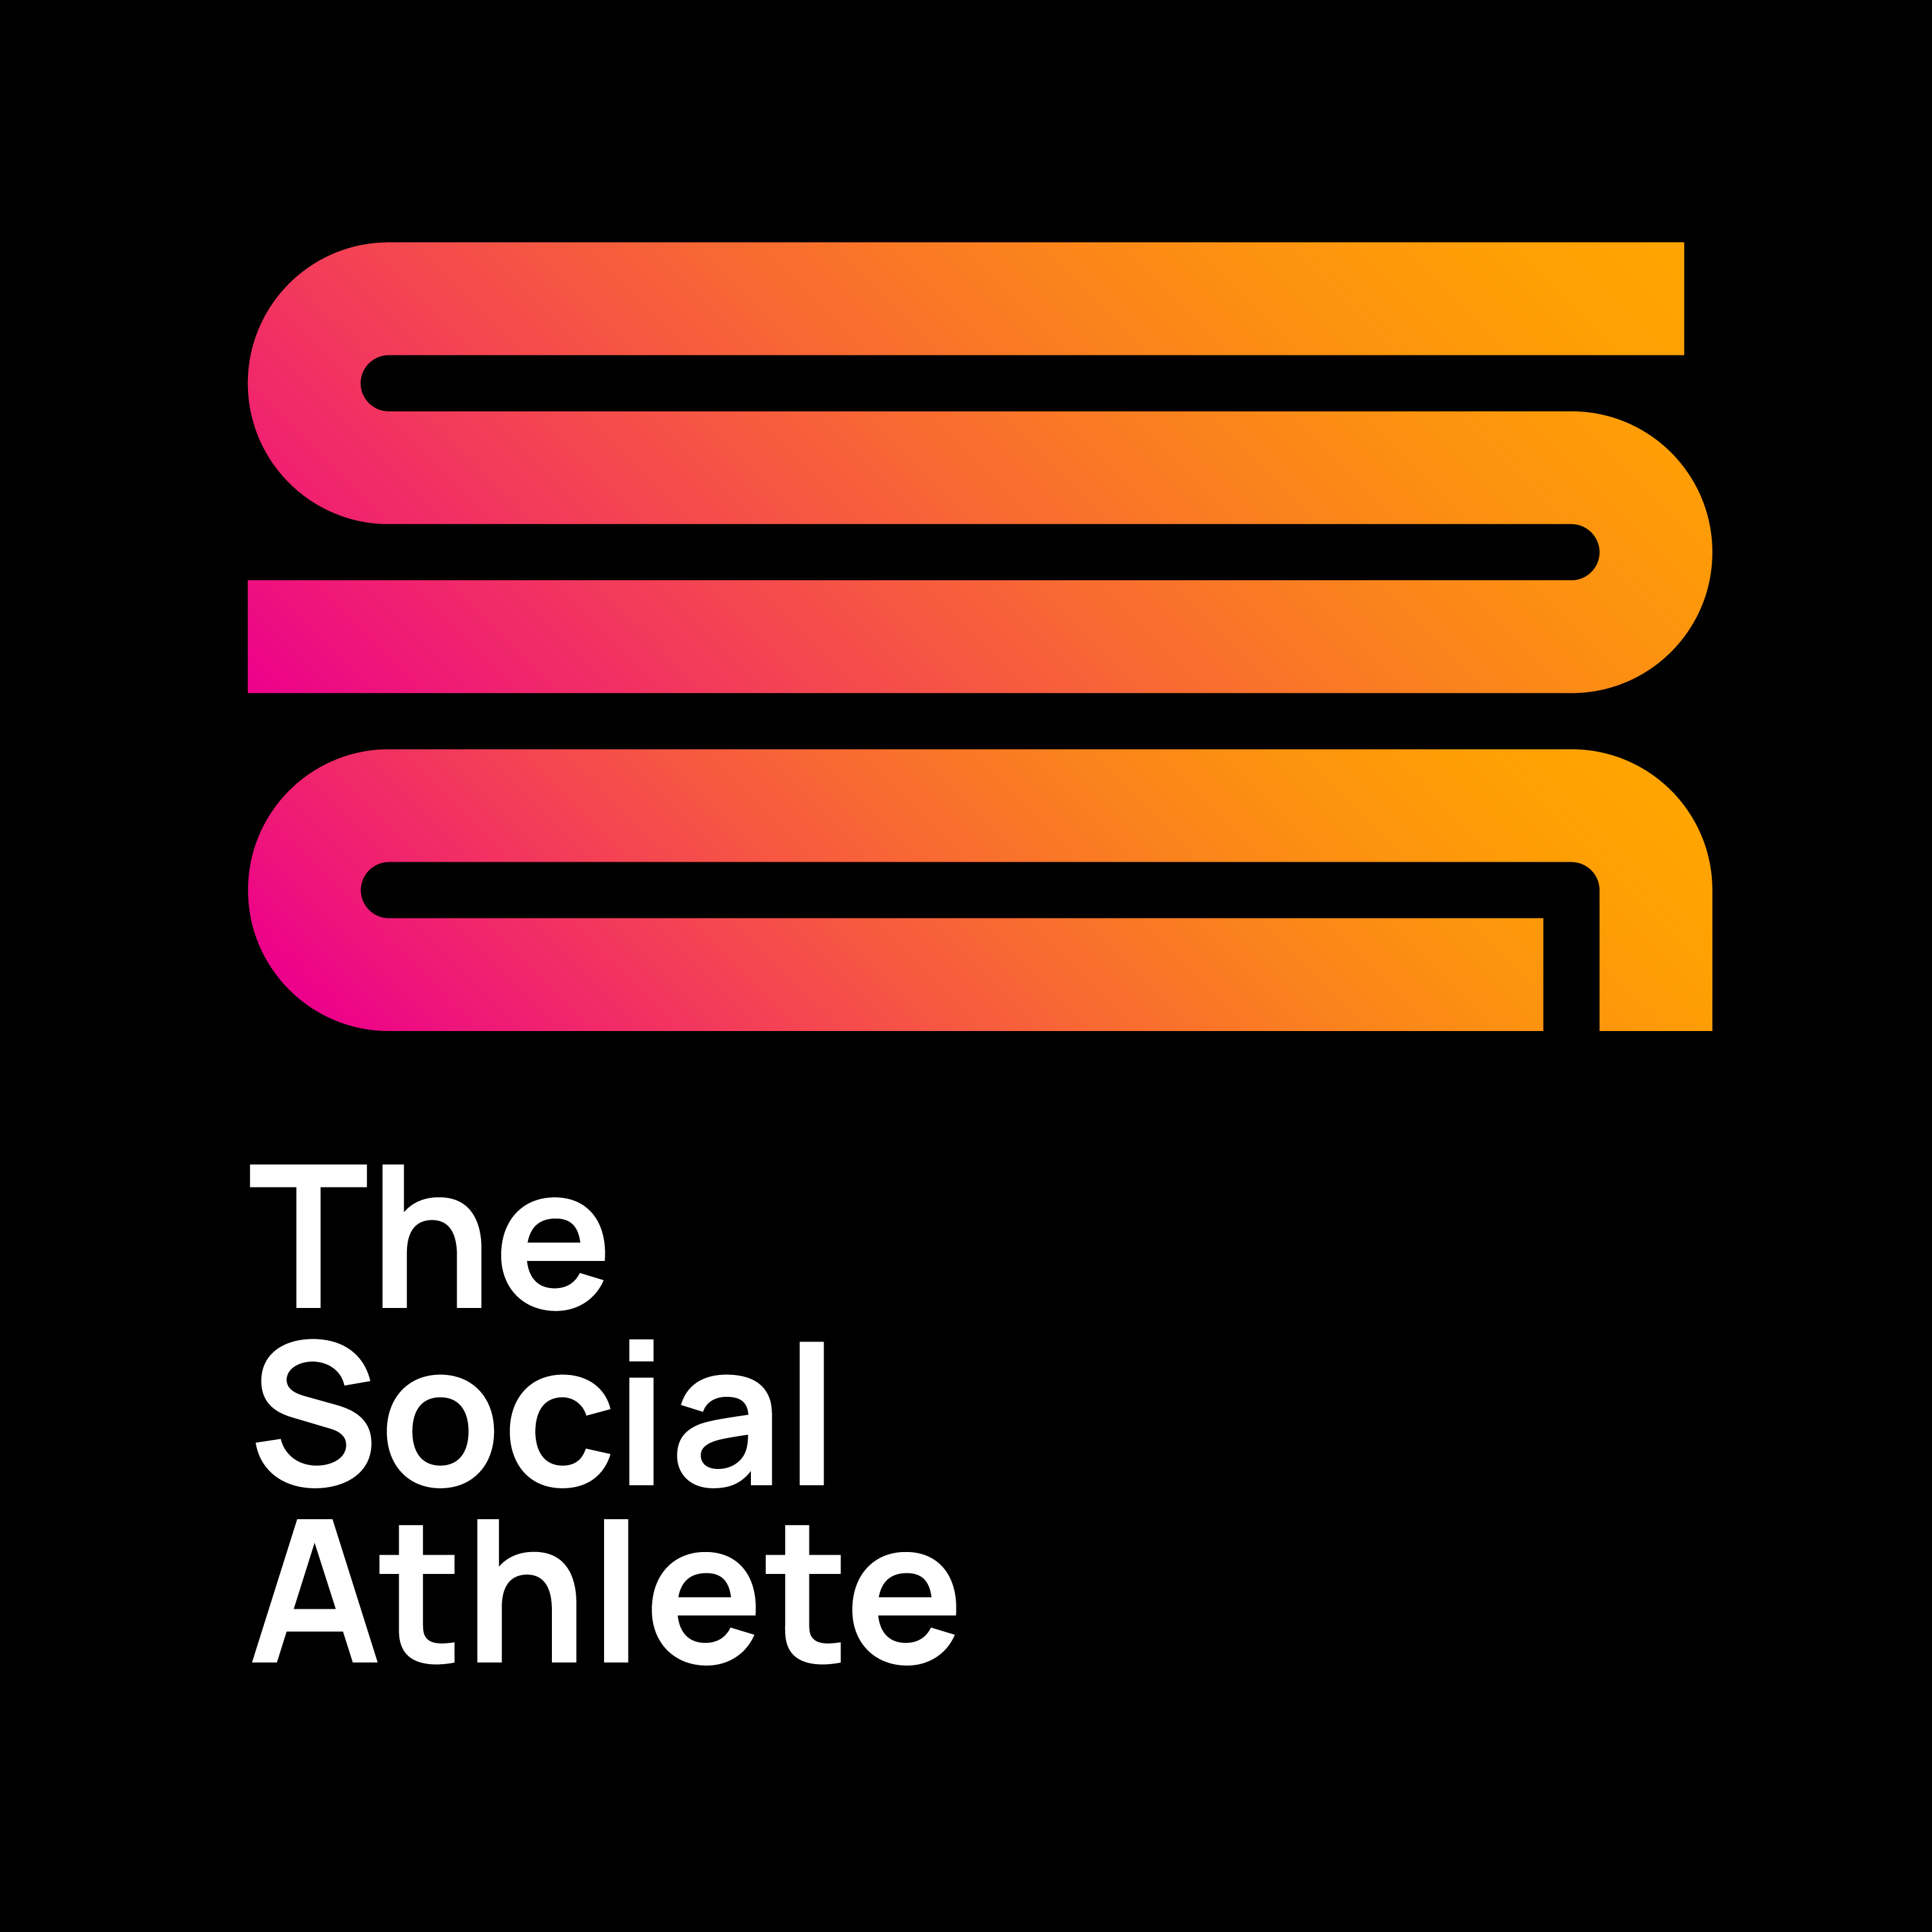 10 New Year's Resolutions for Social Athletes, 7 Types of Social Support